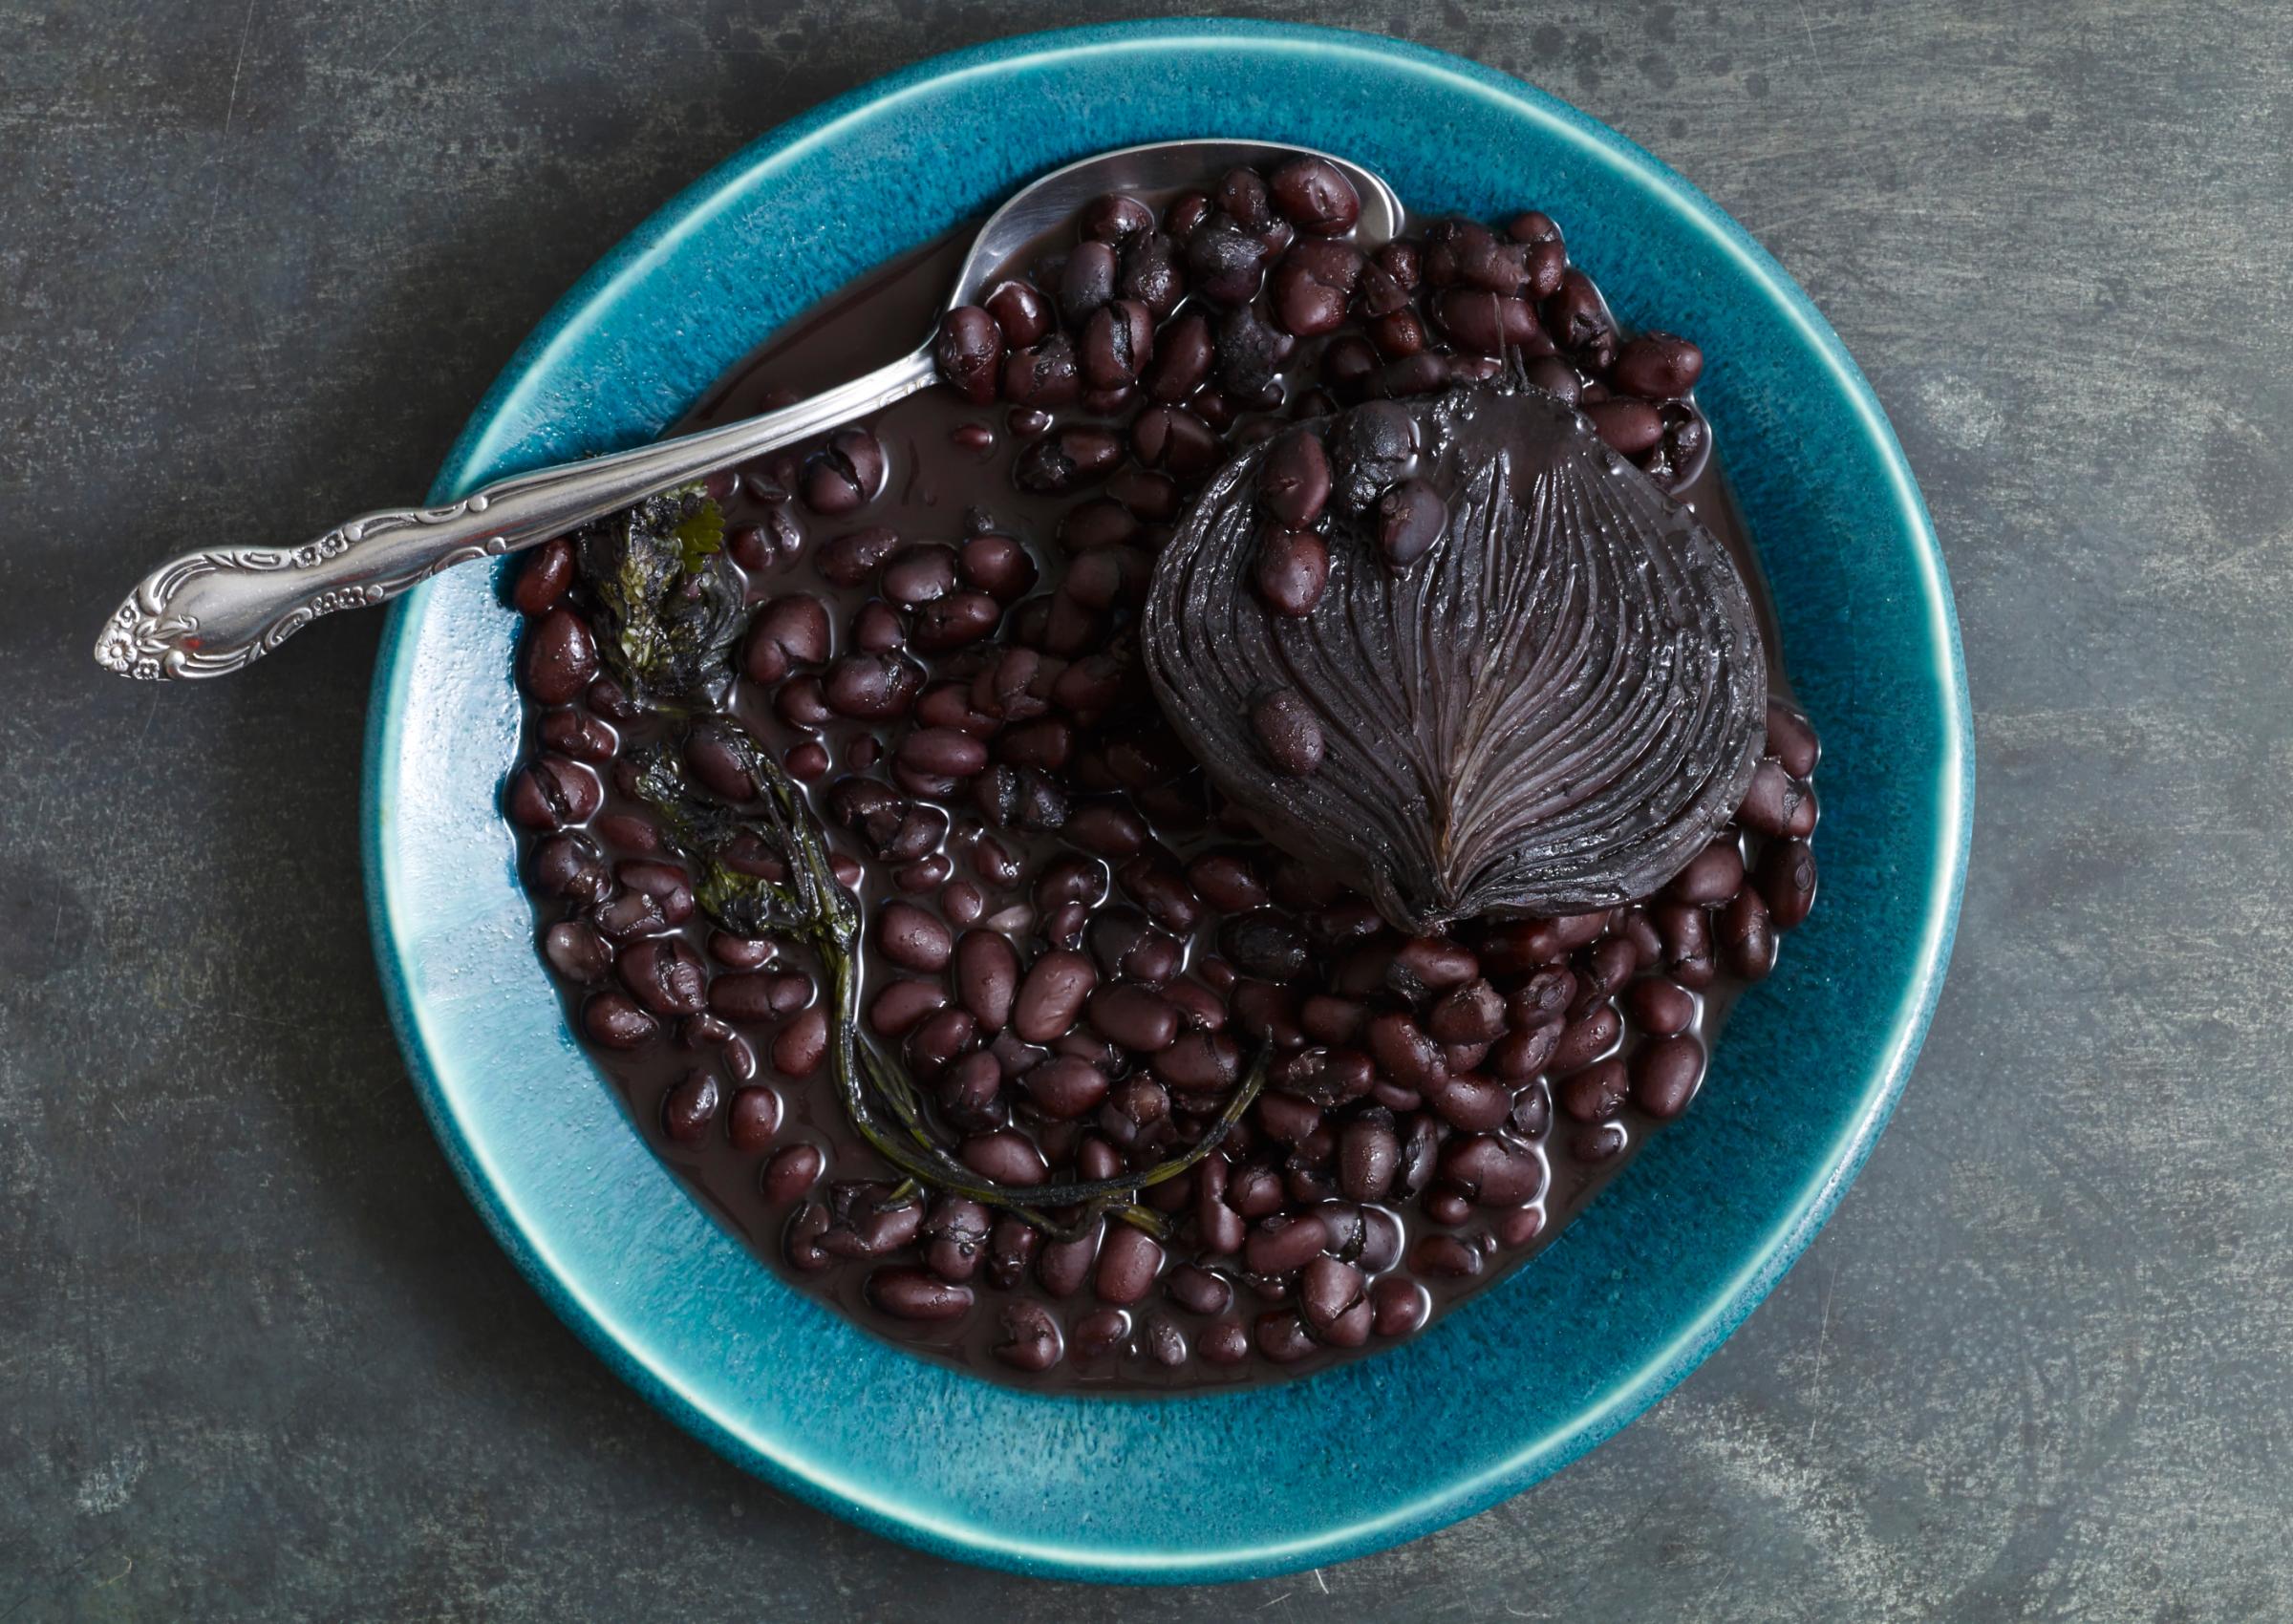 Pati Jinich's Black Beans from the Pot